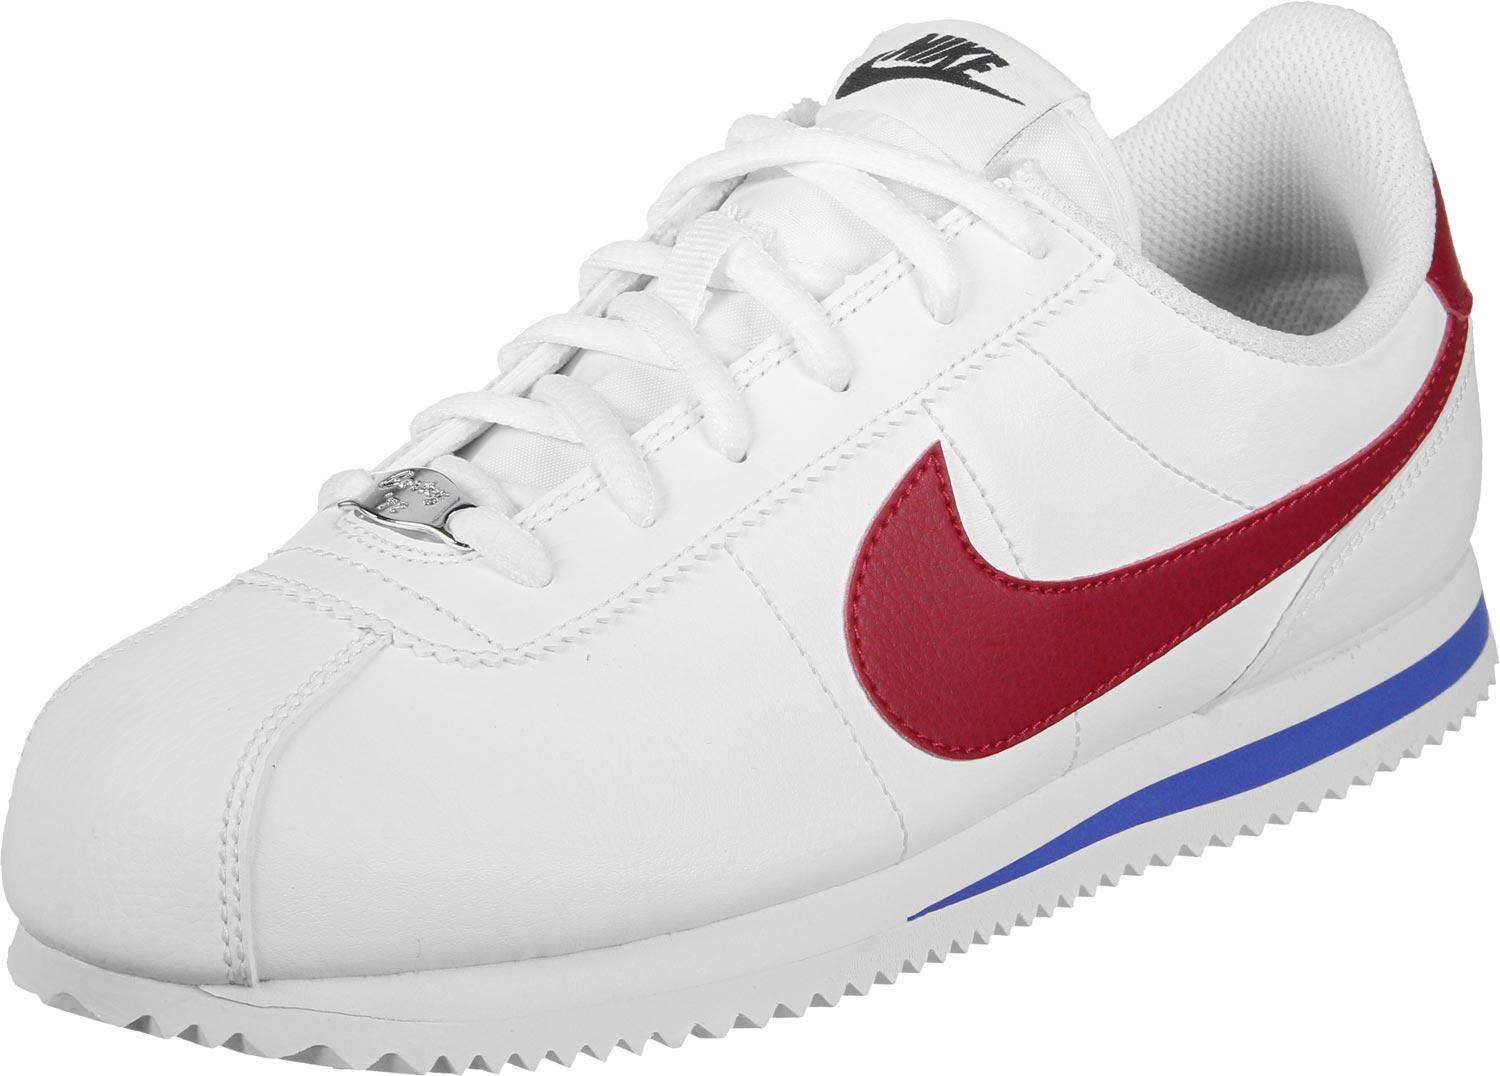 Red and Blue Nike Logo - Nike Cortez Basic SL GS shoes white red blue